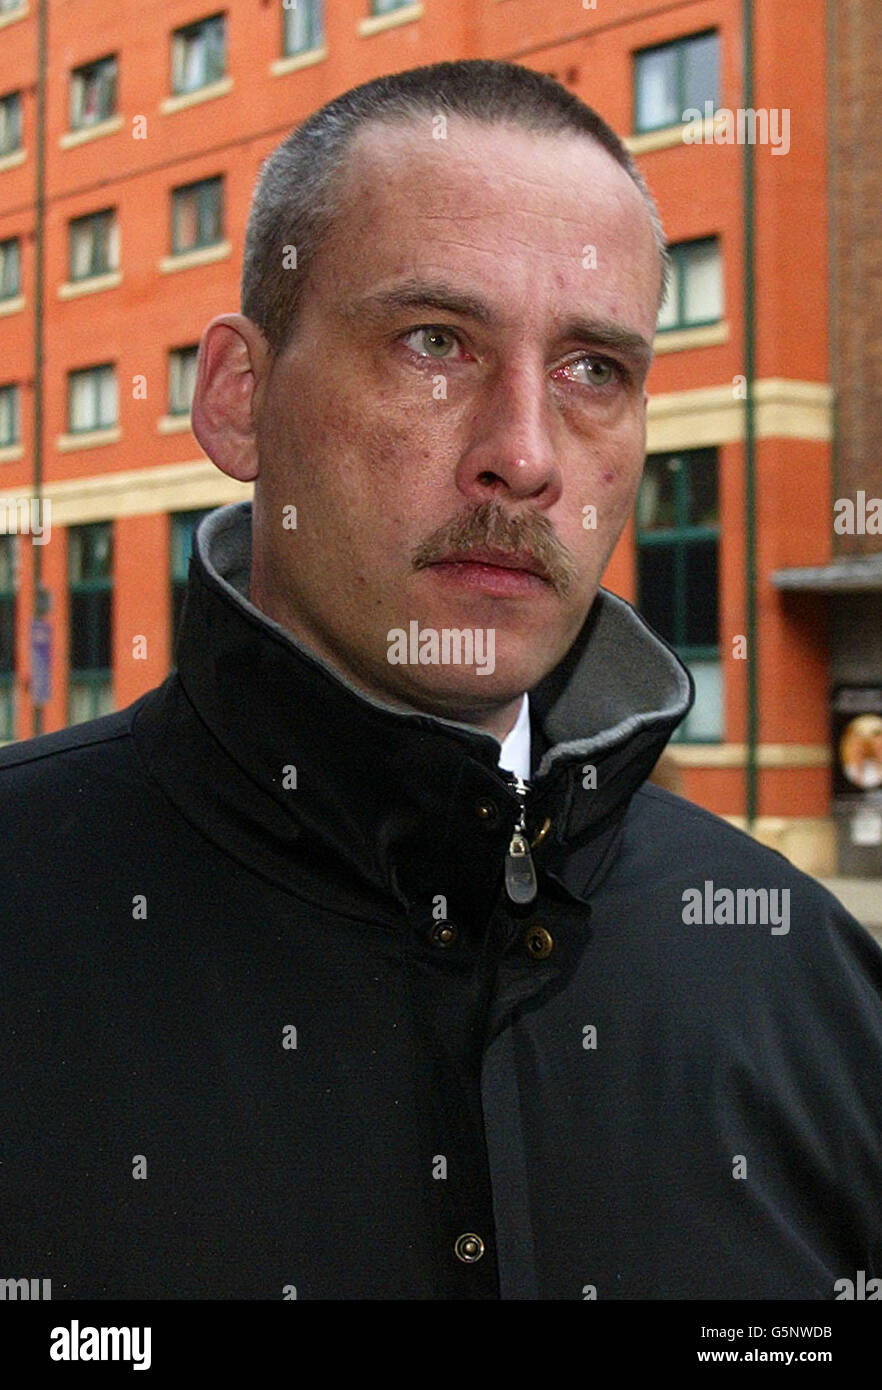 Greater Manchester PC Mark Slater, 40, who was found guily of theft last month, arrives at Minshull Street Crown Court in Manchester, where he was jailed for four months after stealing a charity collection made in memory of a colleague who had died of cancer. * ... Debt-ridden PC Slater from bolton, used some of the 2,000 raised for cancer charities to go on a holiday to Florida with his then girlfriend Christine Perry having organised a fundraising ball in memory of Sergeant Clive Holmyard, who had died of cancer aged 46. Former special constable Christine Perry 34, from bolton was sentenced Stock Photo